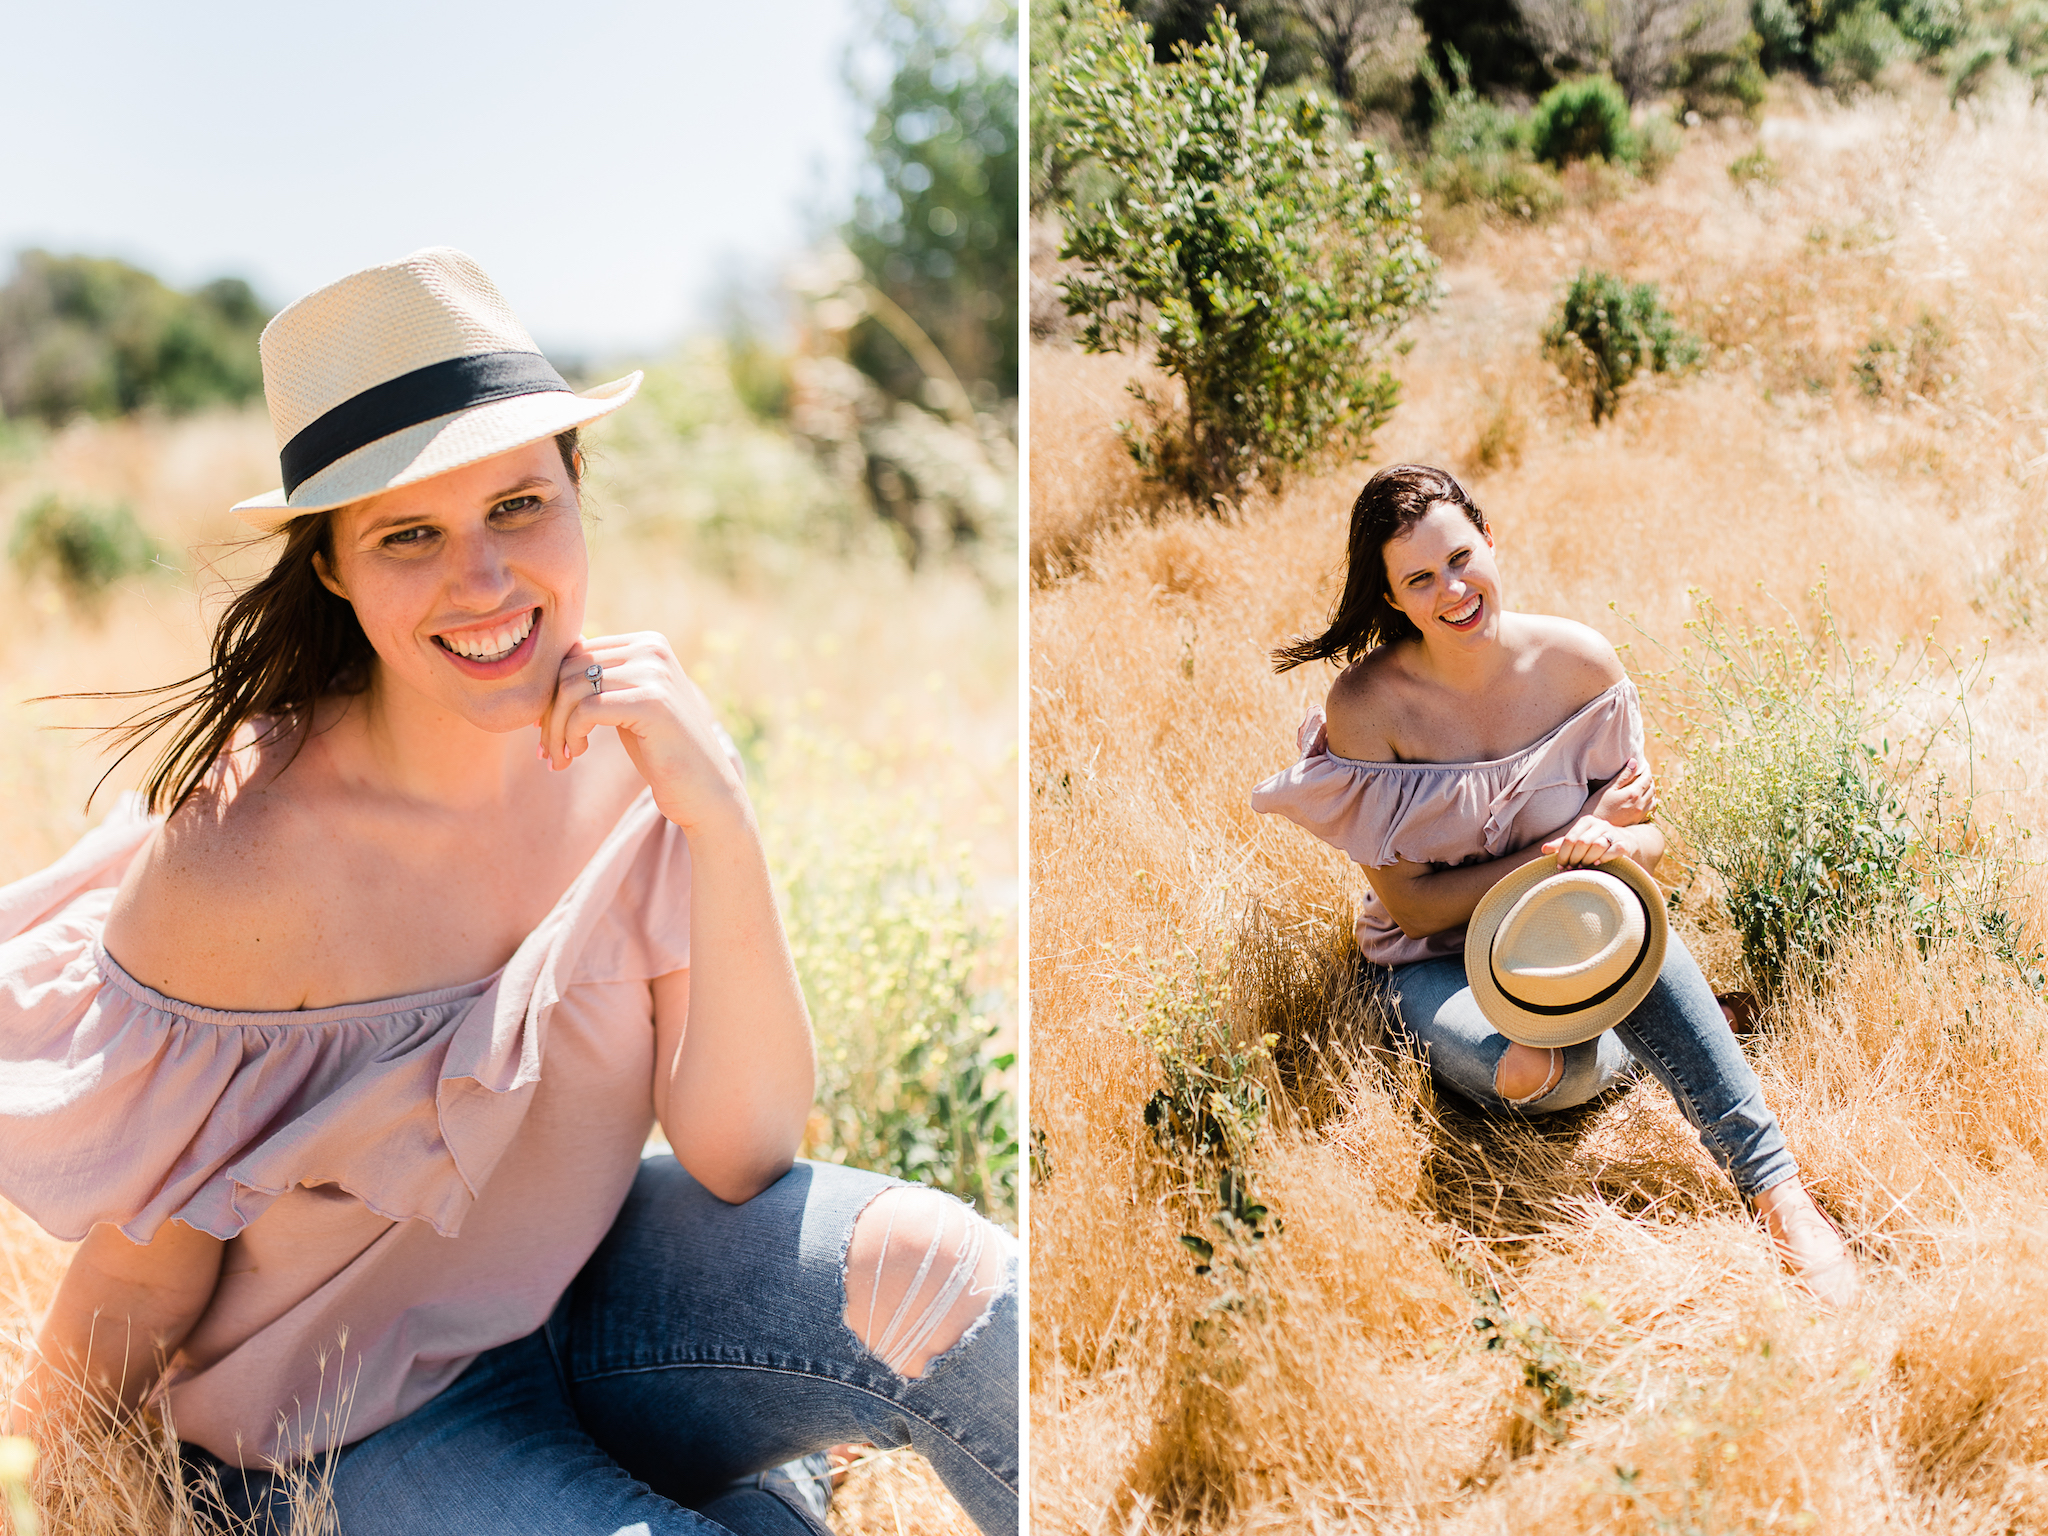 Shoreline Lake Portraits with Kirsty